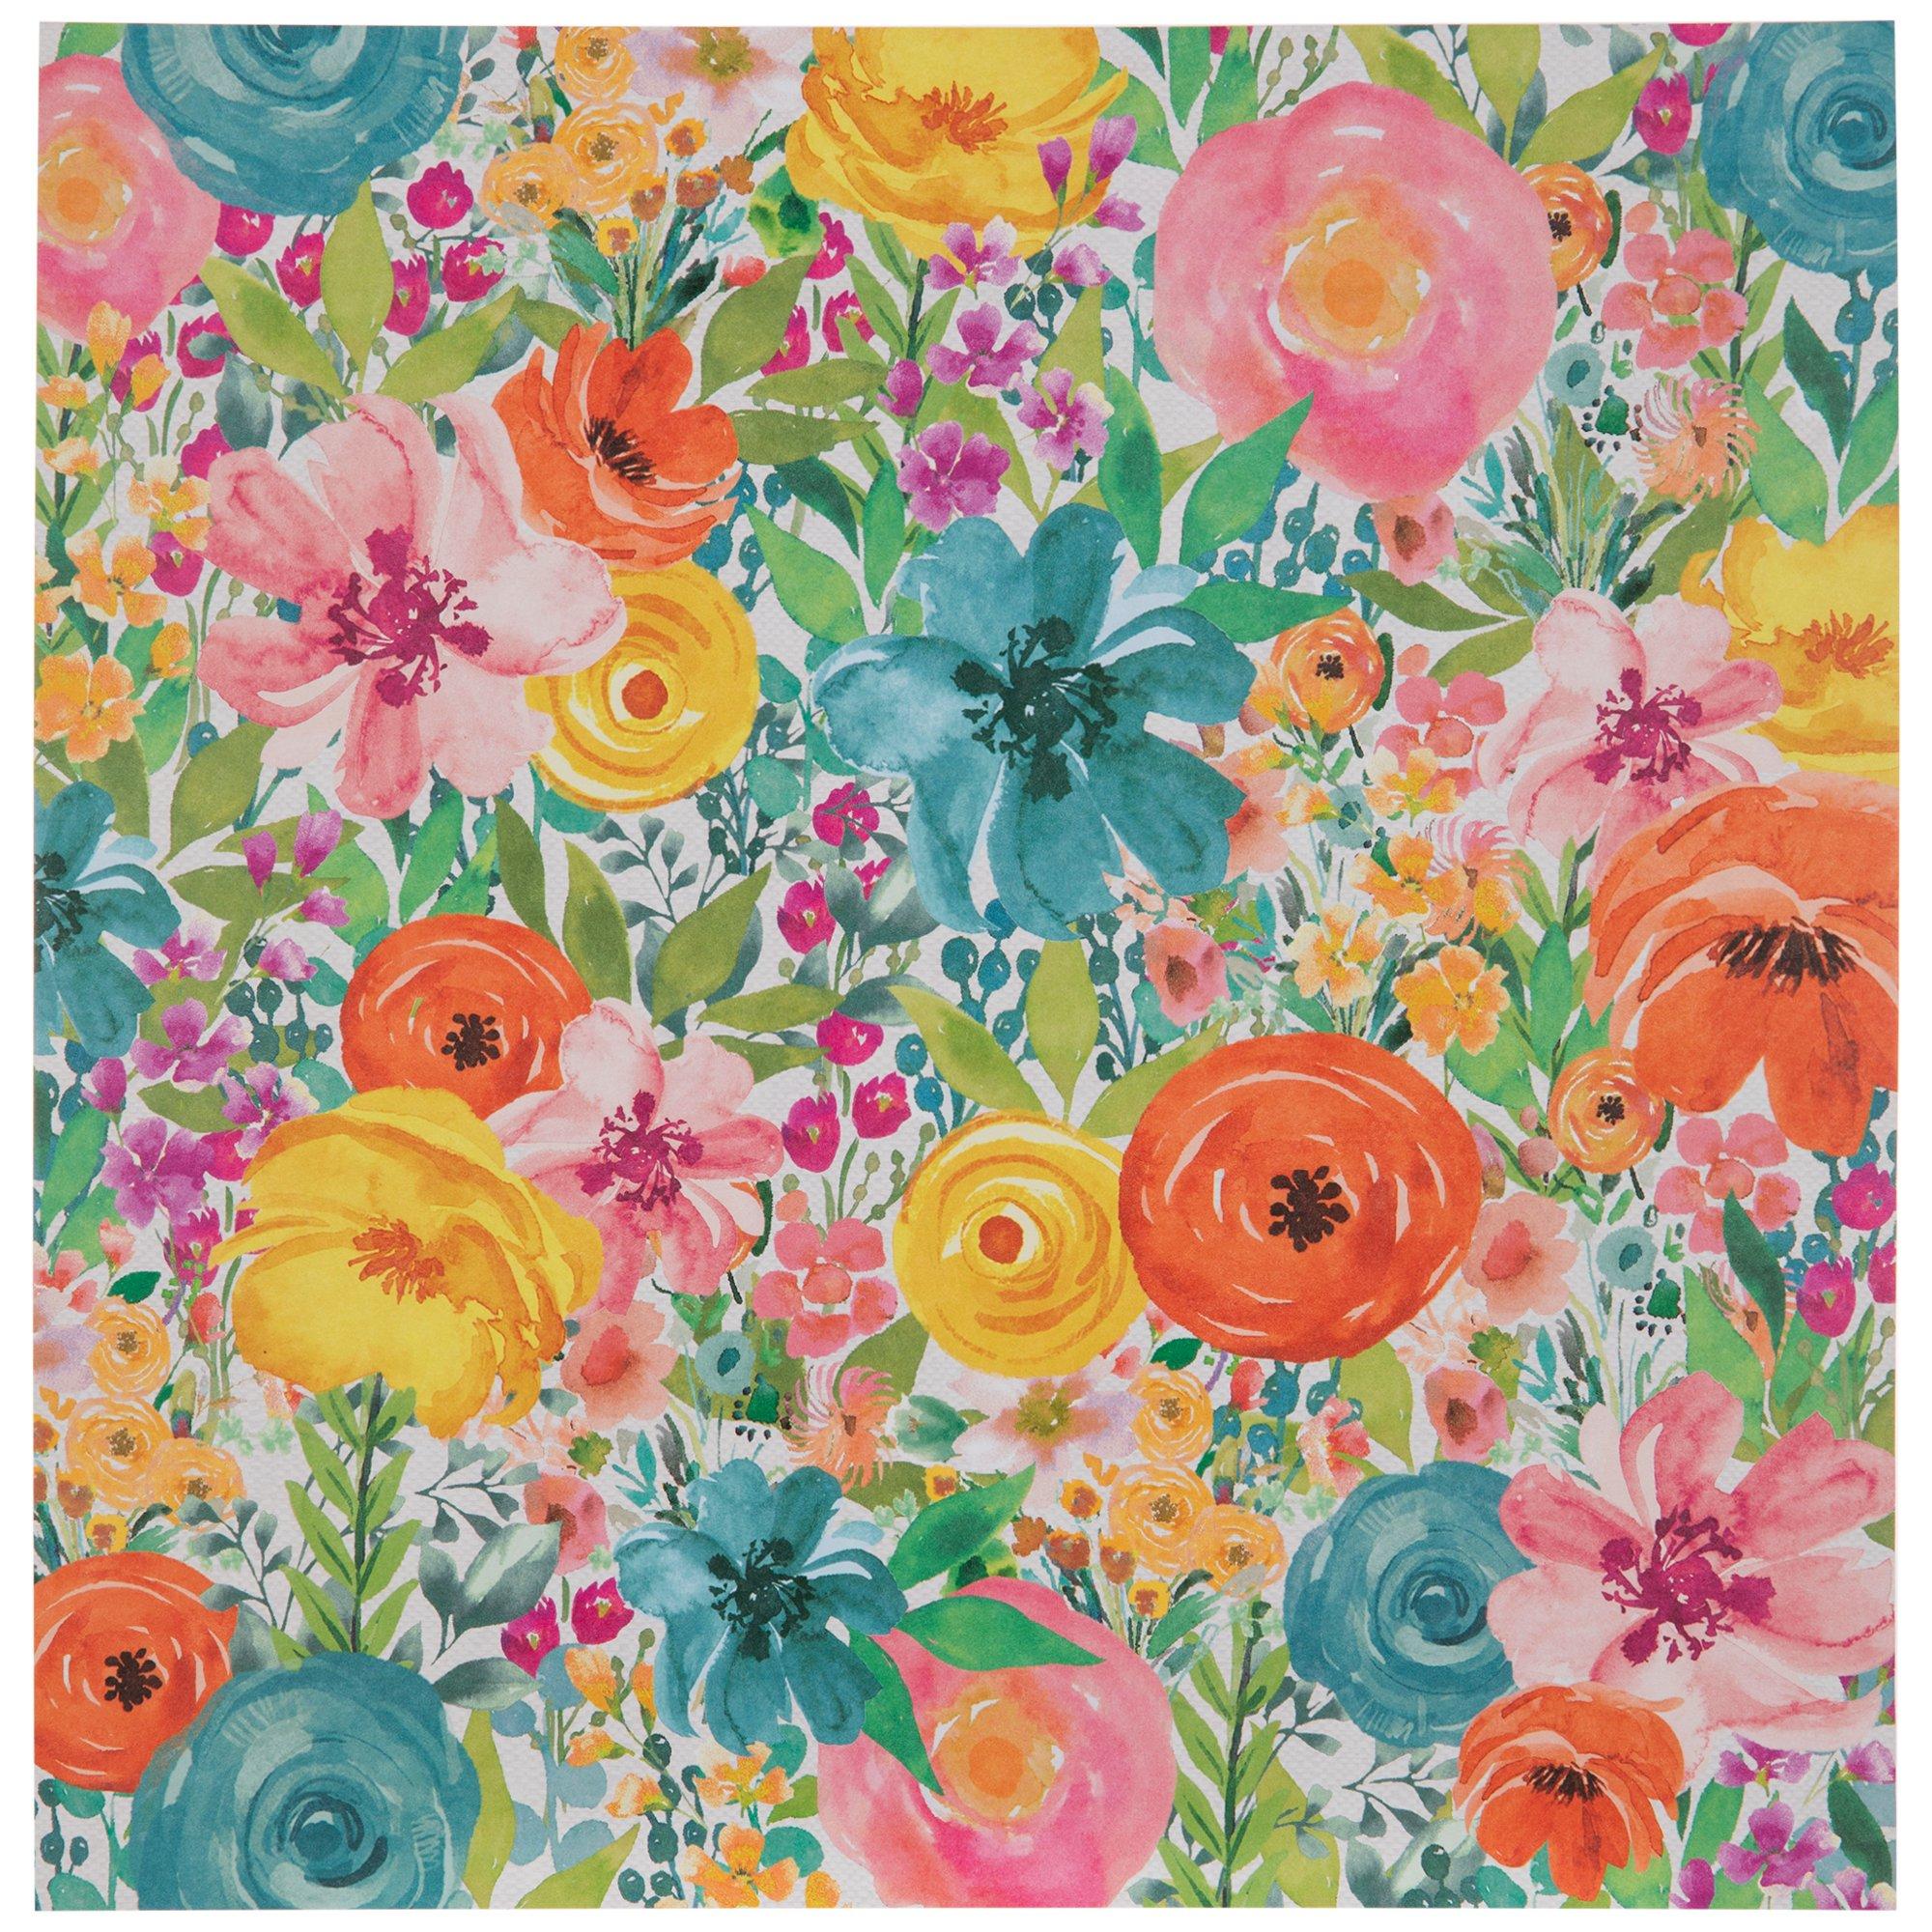 Bright Floral Watercolor Scrapbook Paper | Hobby Lobby | 2300663